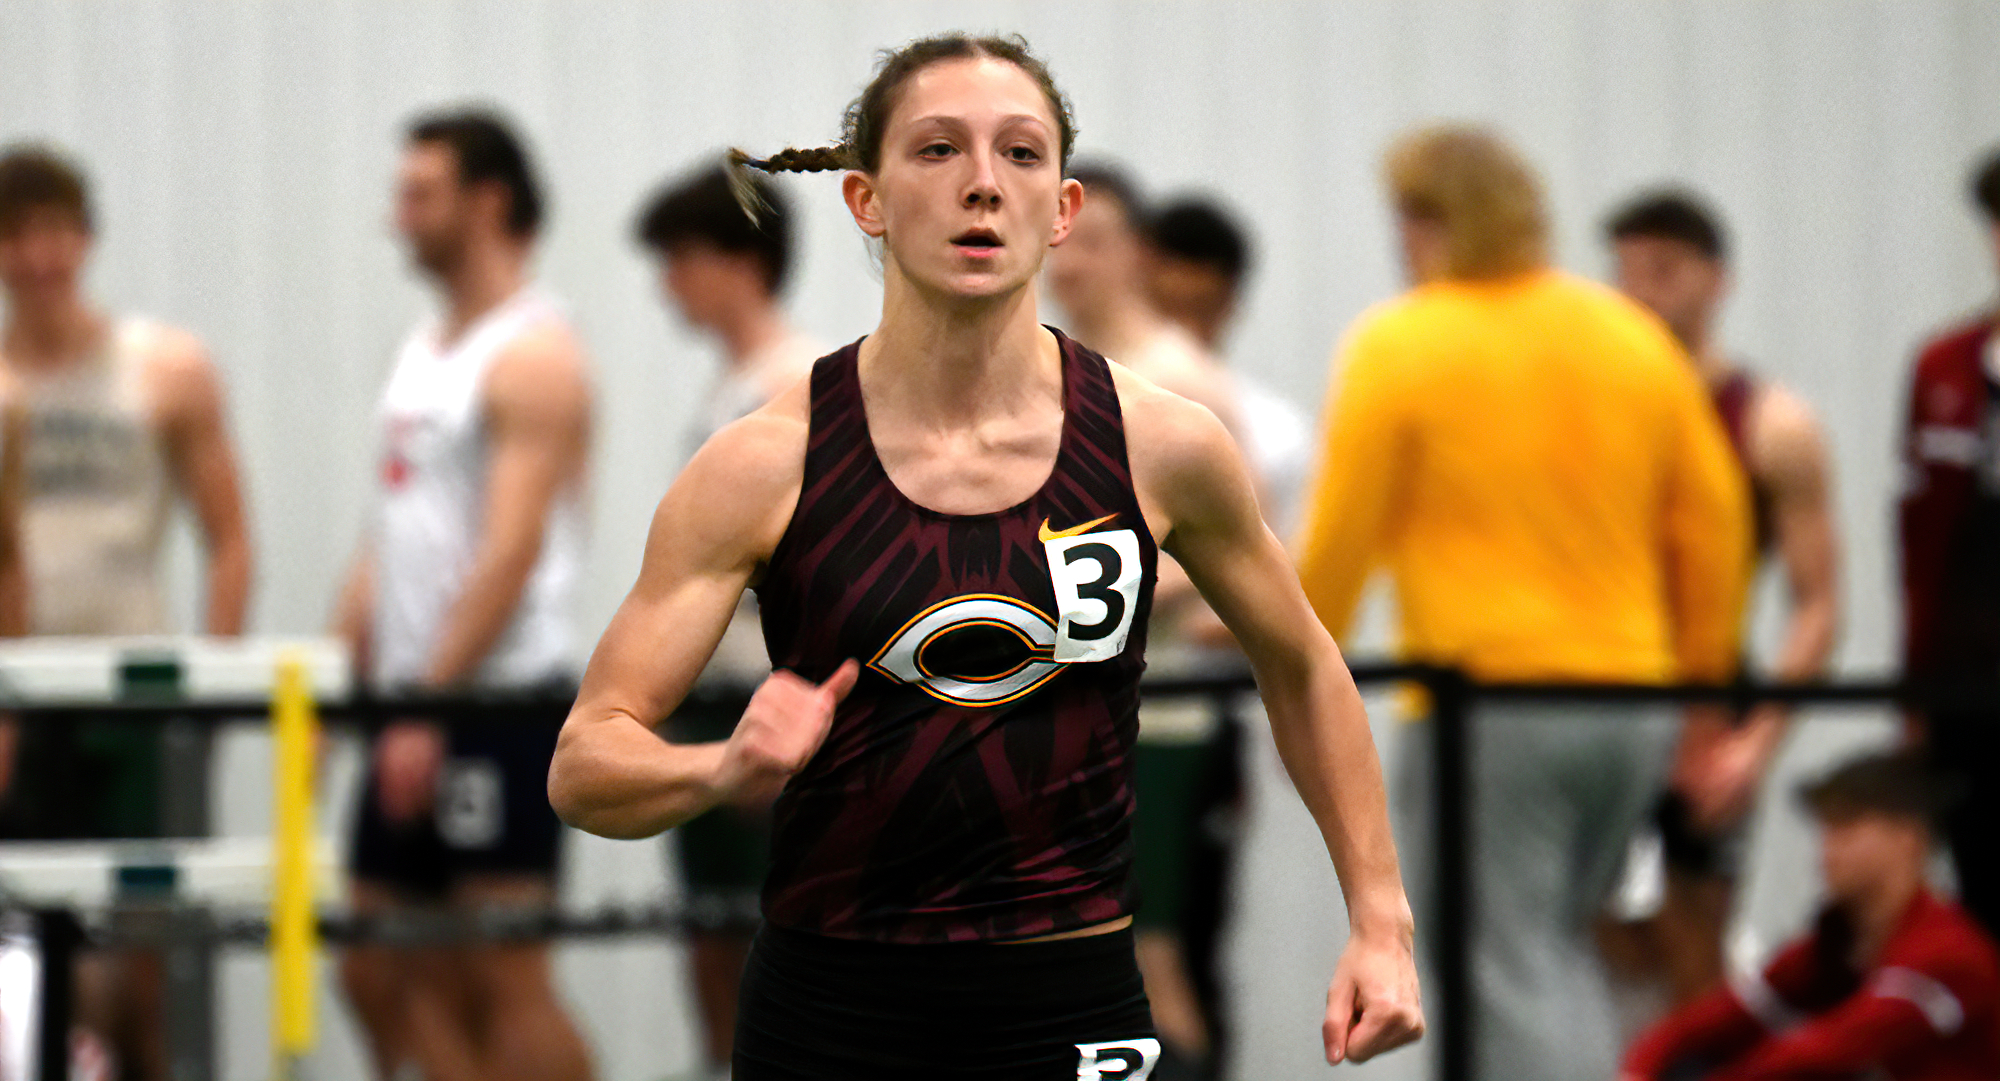 Sophomore Emily Rengo tied the 20-year-old school record in the 60-meter dash at the UND Tune-Up.